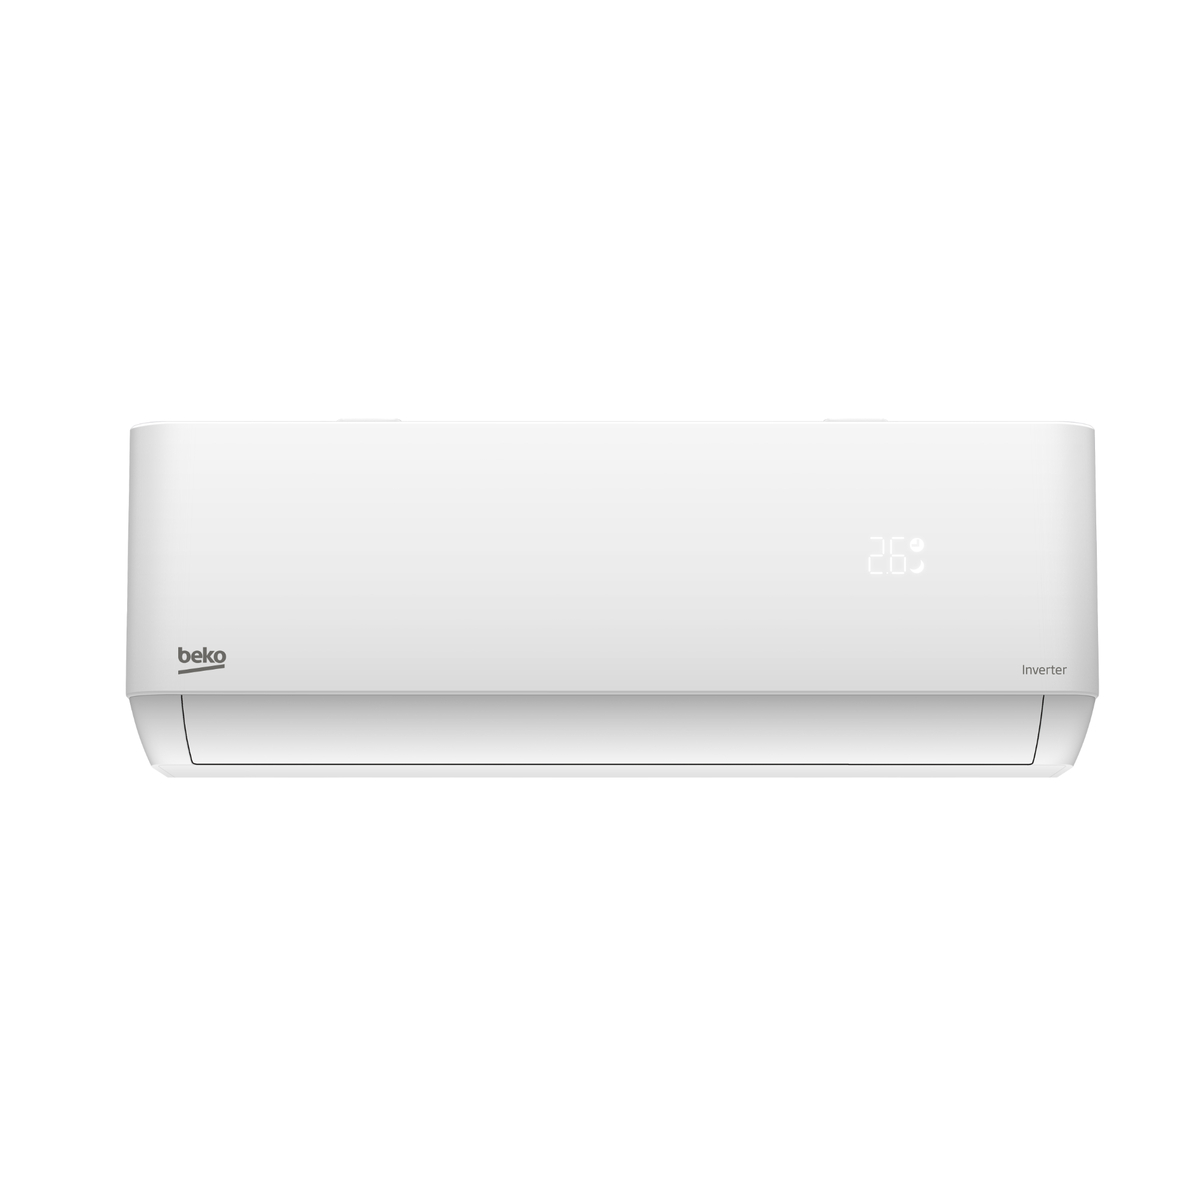 Beko Hot and Cool Split Air Conditioner, 1.5 T, White, BMVIG180